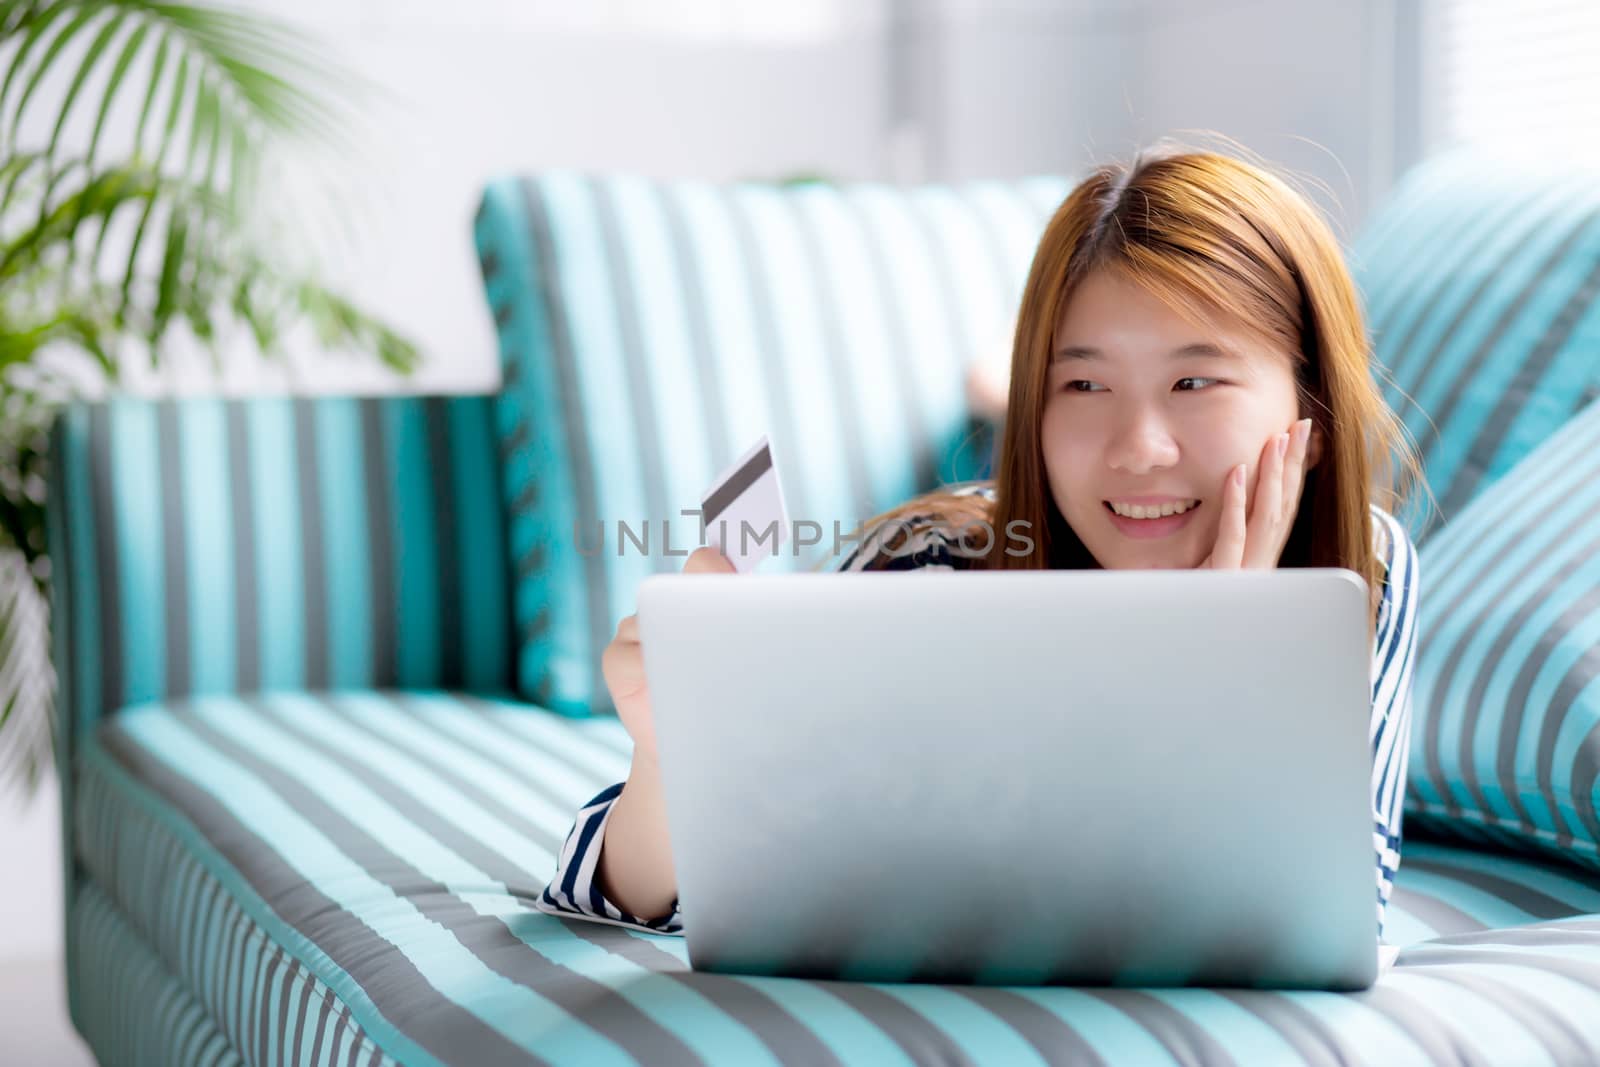 Beautiful of portrait young asian woman lying users credit card with laptop, Content girl shopping online and payment with notebook computer on sofa, lifestyle concept.